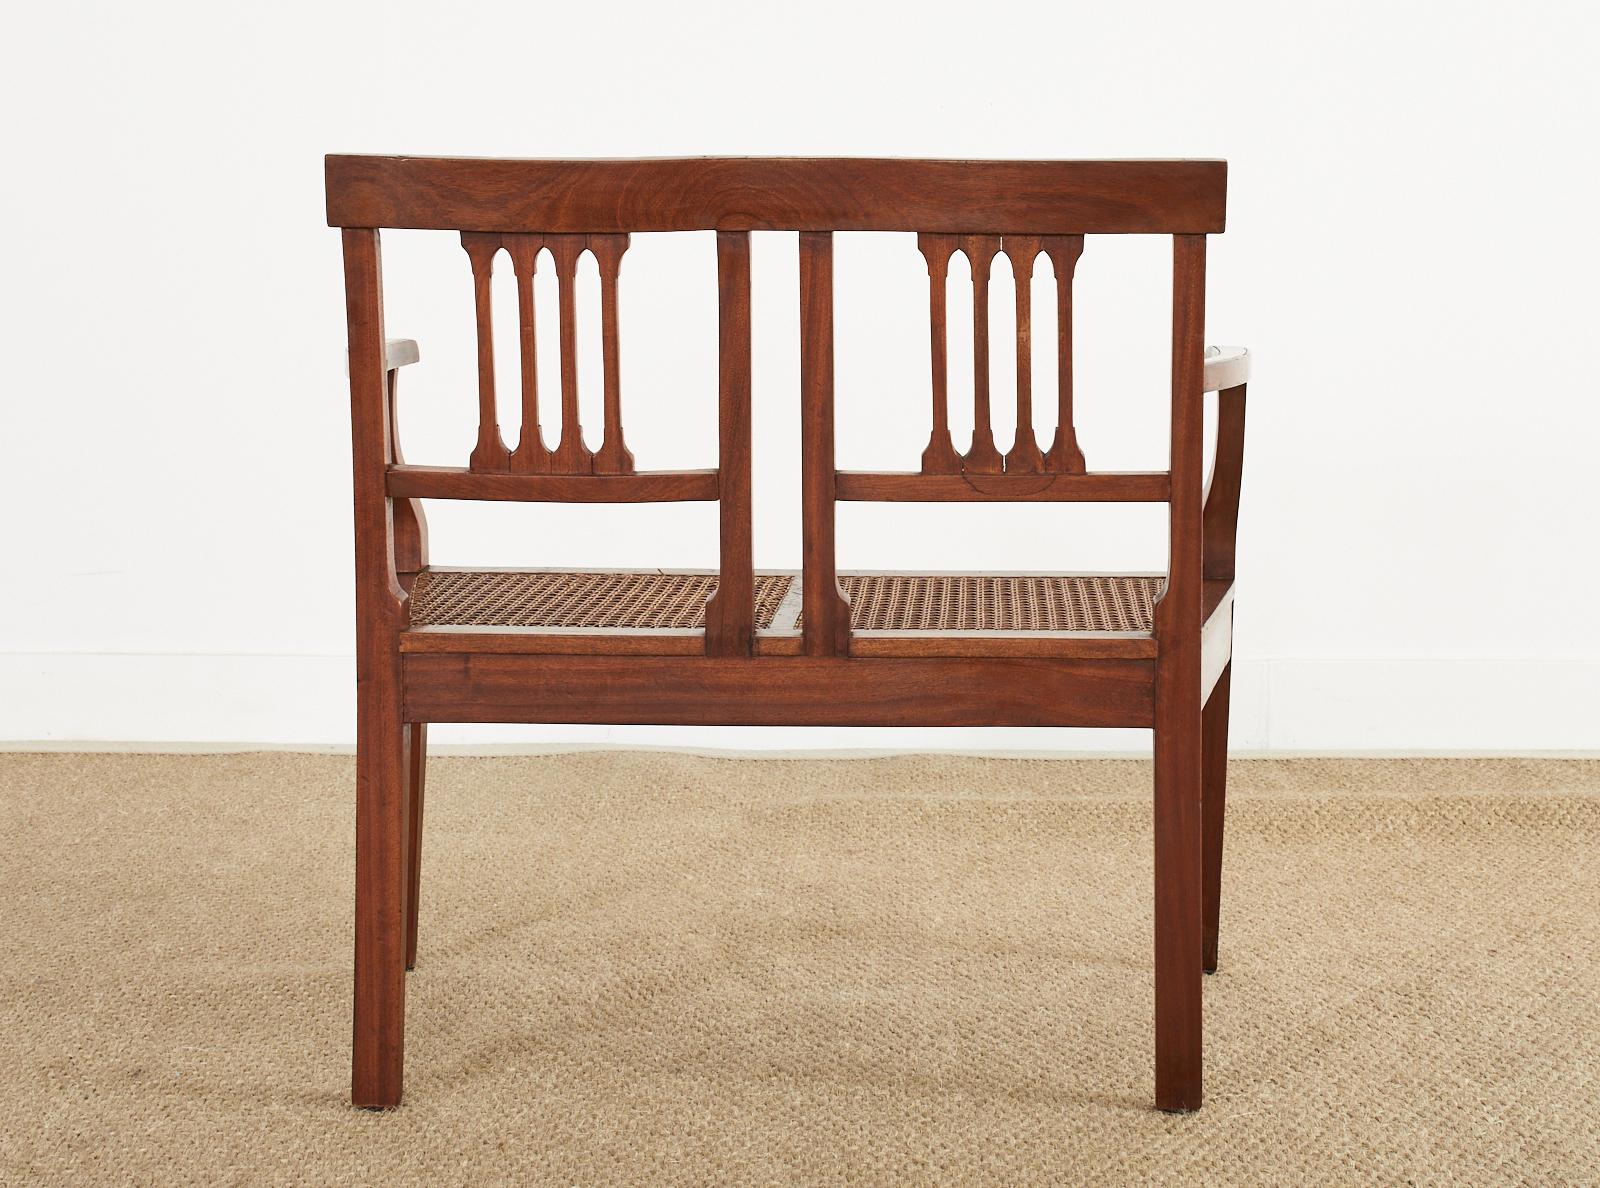 Italian Neoclassical Style Mahogany Cane Seat Bench Settee For Sale 8